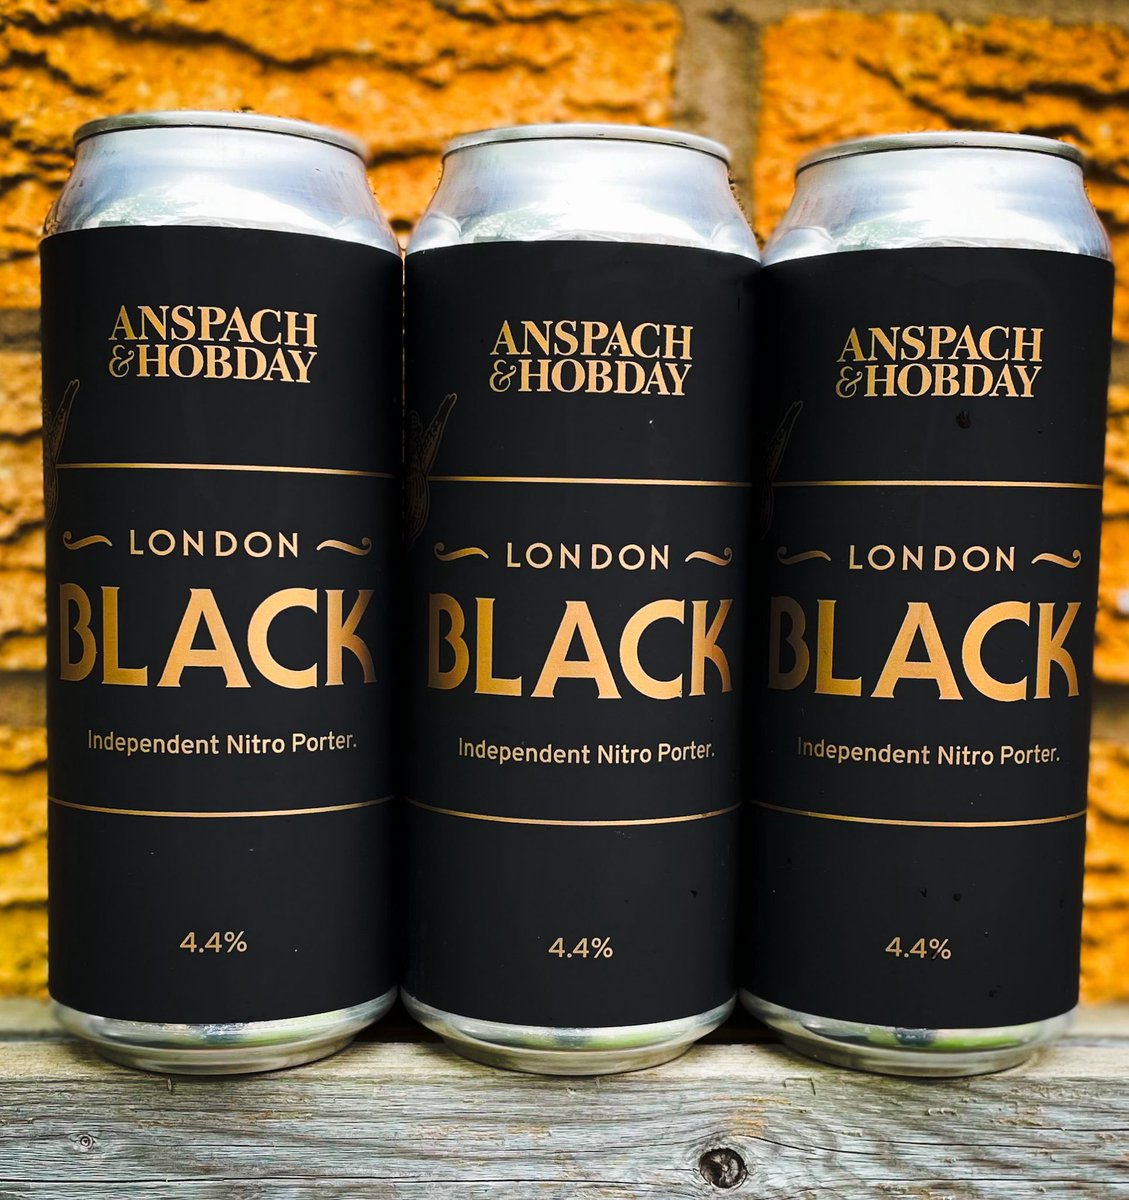 Tried it in can yet? @AnspachHobday thebeergarage.co.uk